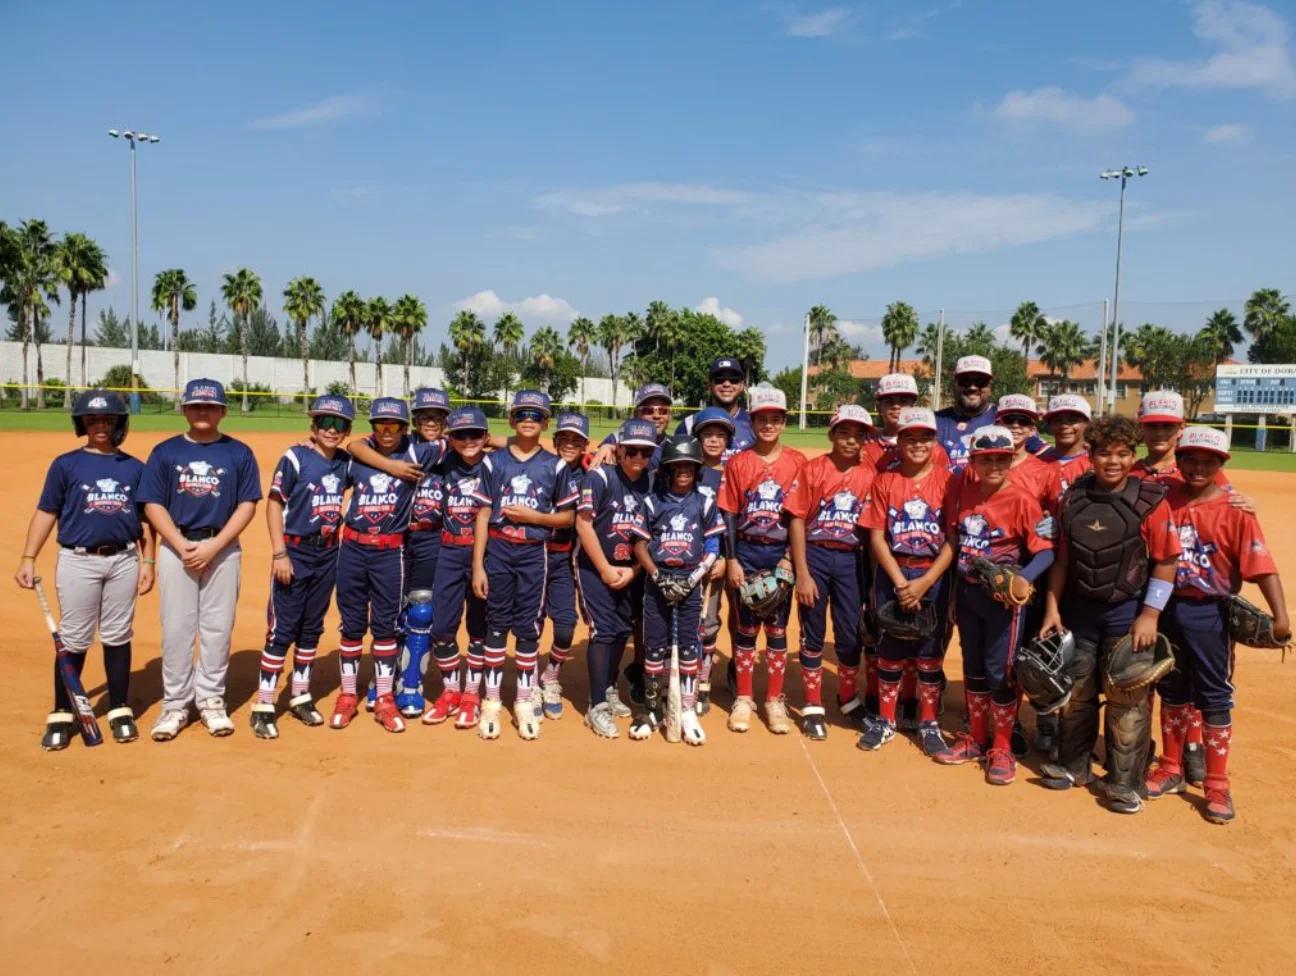 Preview of: Doral Little League | Happier families & greater value: how TeamSnap enabled growth